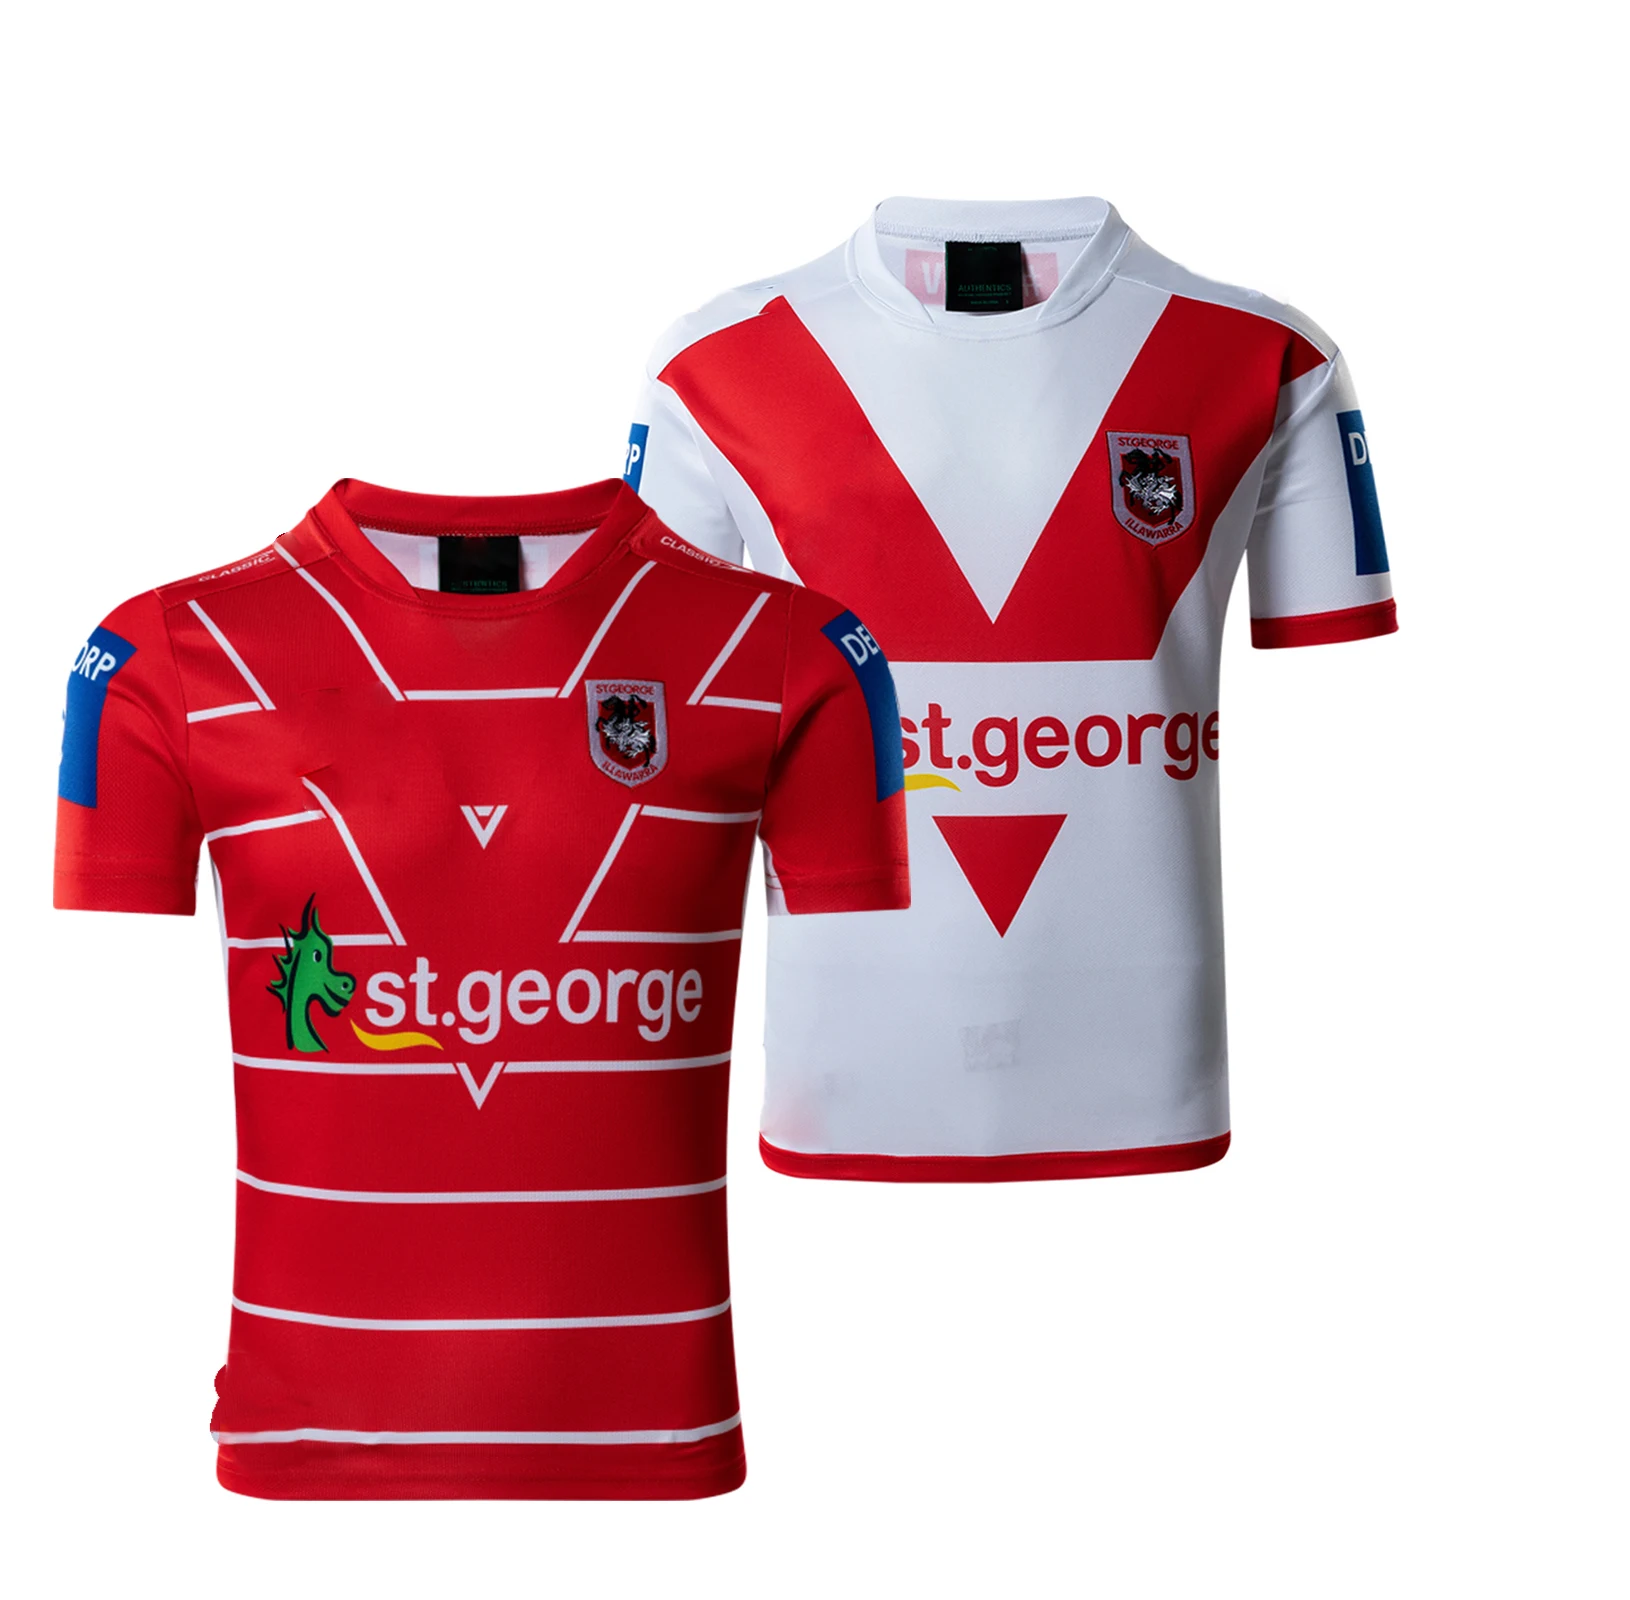 

2021 ST.GEORGE DRAGON Men's Home/Away Rugby Jersey S-5XL